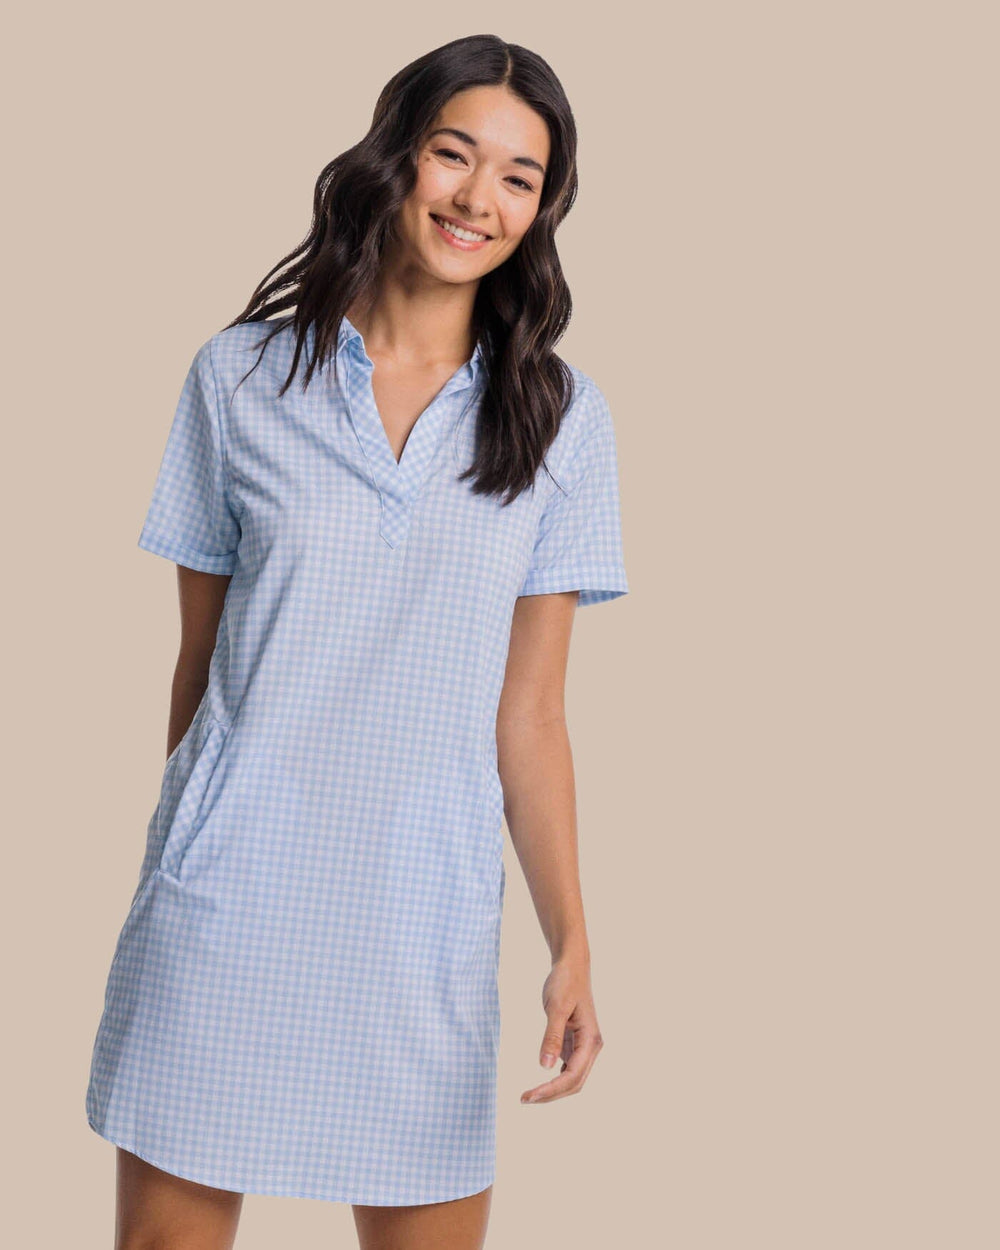 The front view of the Southern Tide Kamryn brrr°® Intercoastal Gingham Dress by Southern Tide - Sky Blue